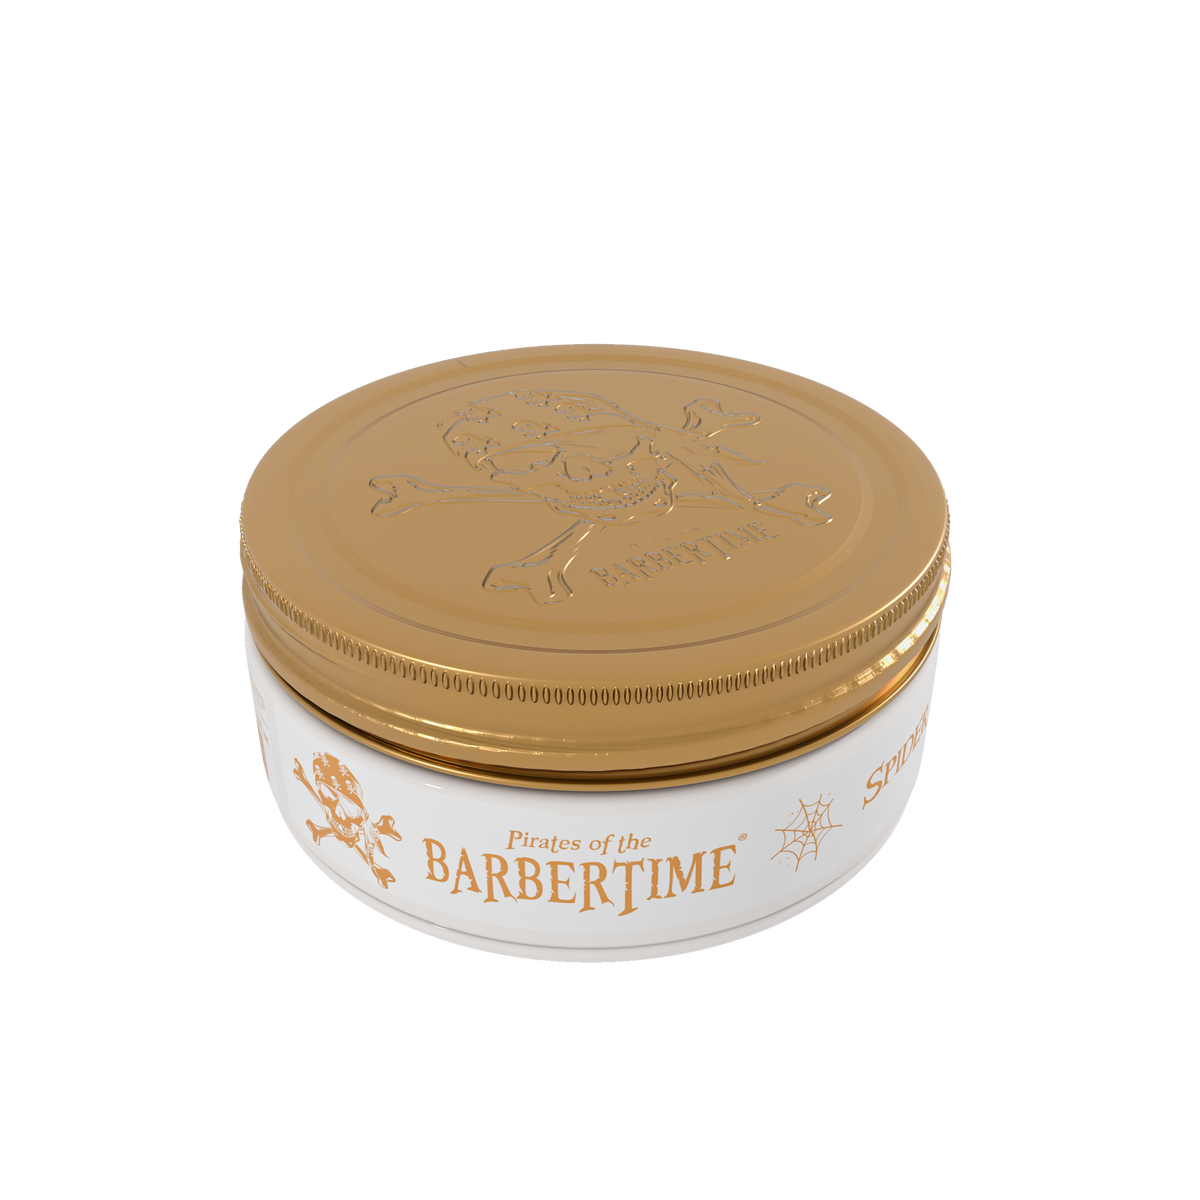 Barbertime Spider Keratin Ointment